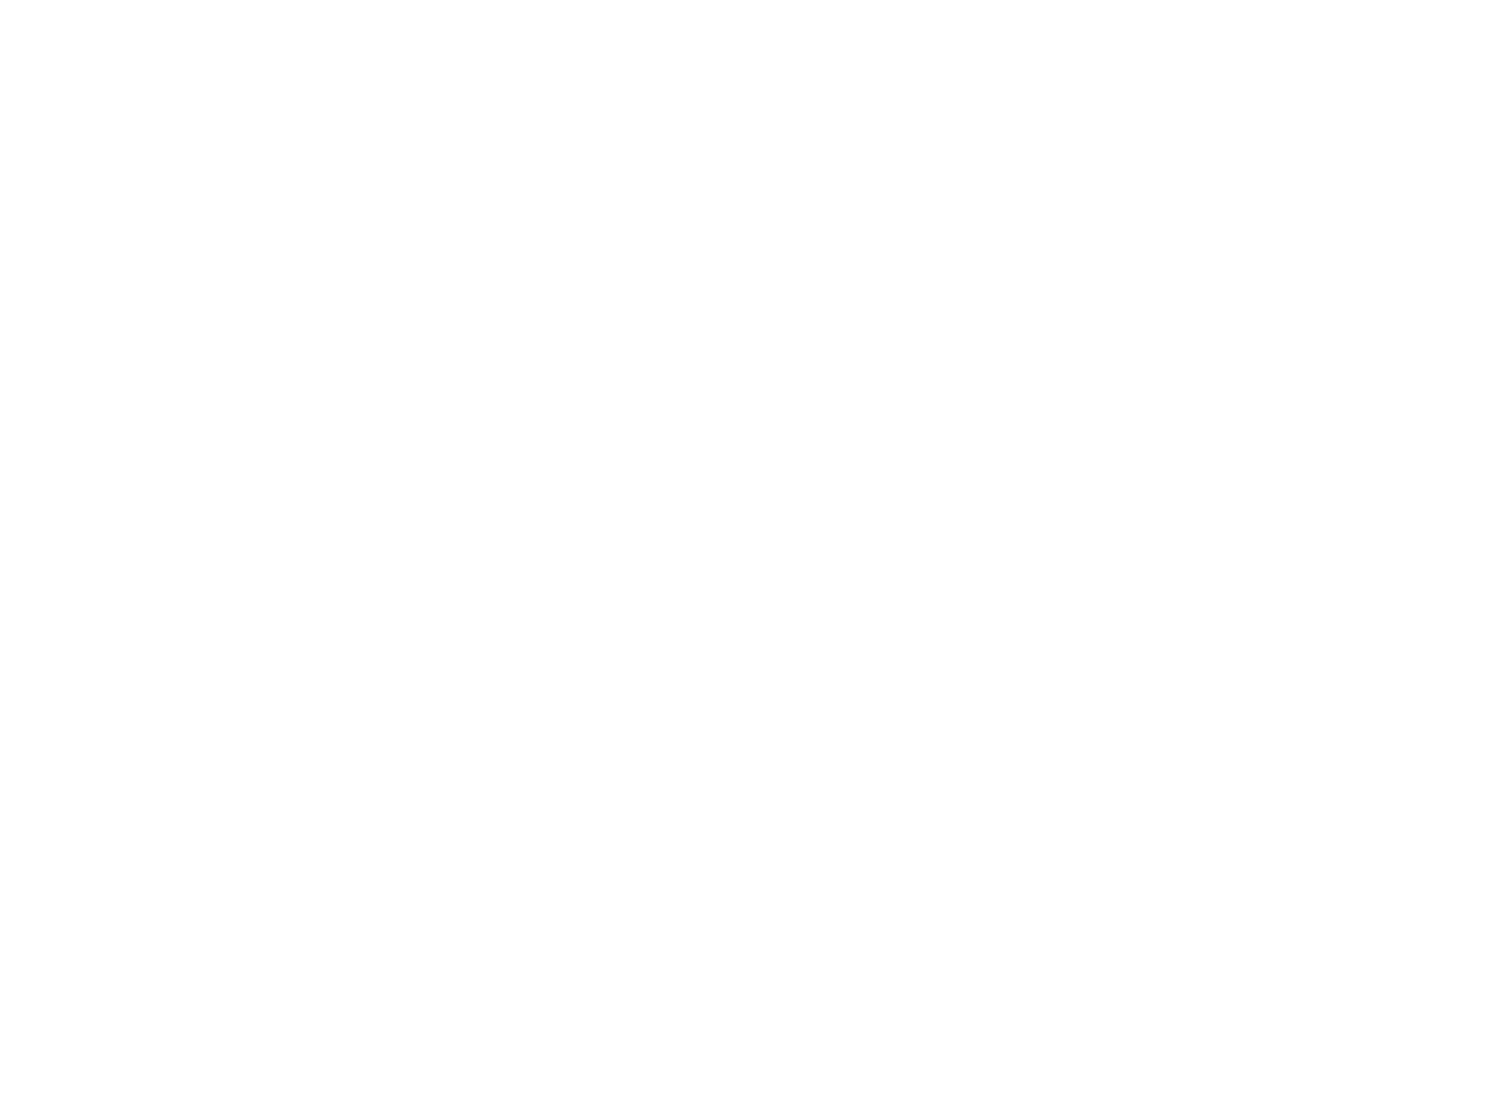 Pale Rebel Productions